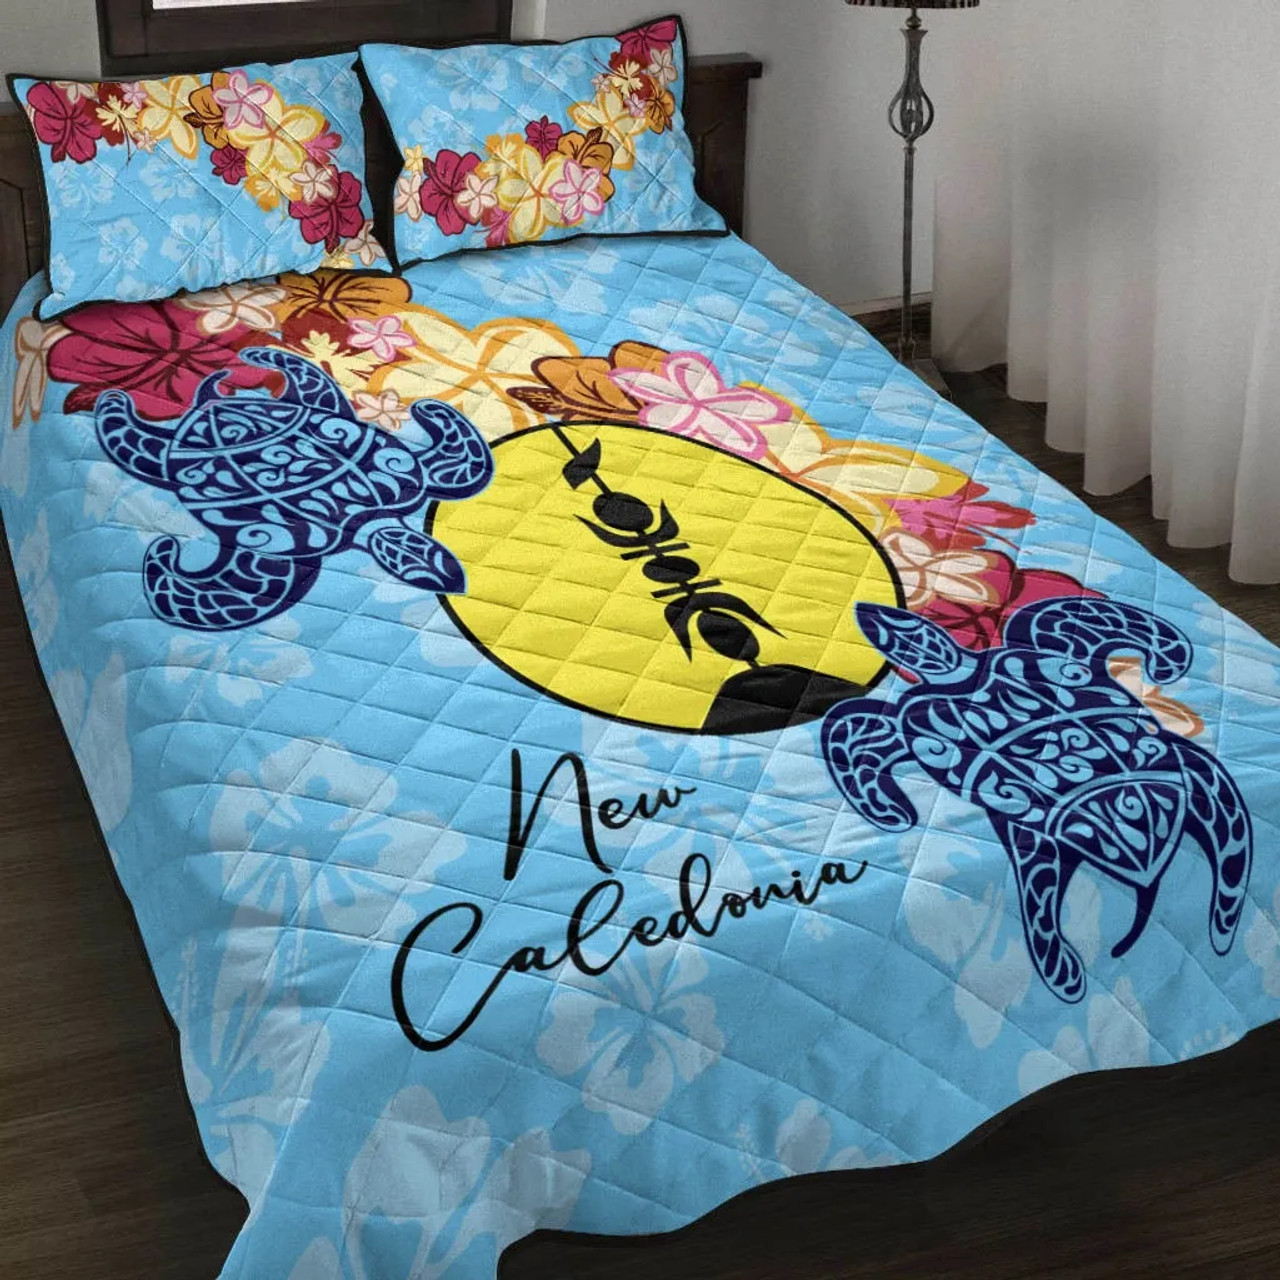 New Caledonia Quilt Bed Set - Tropical Style 1